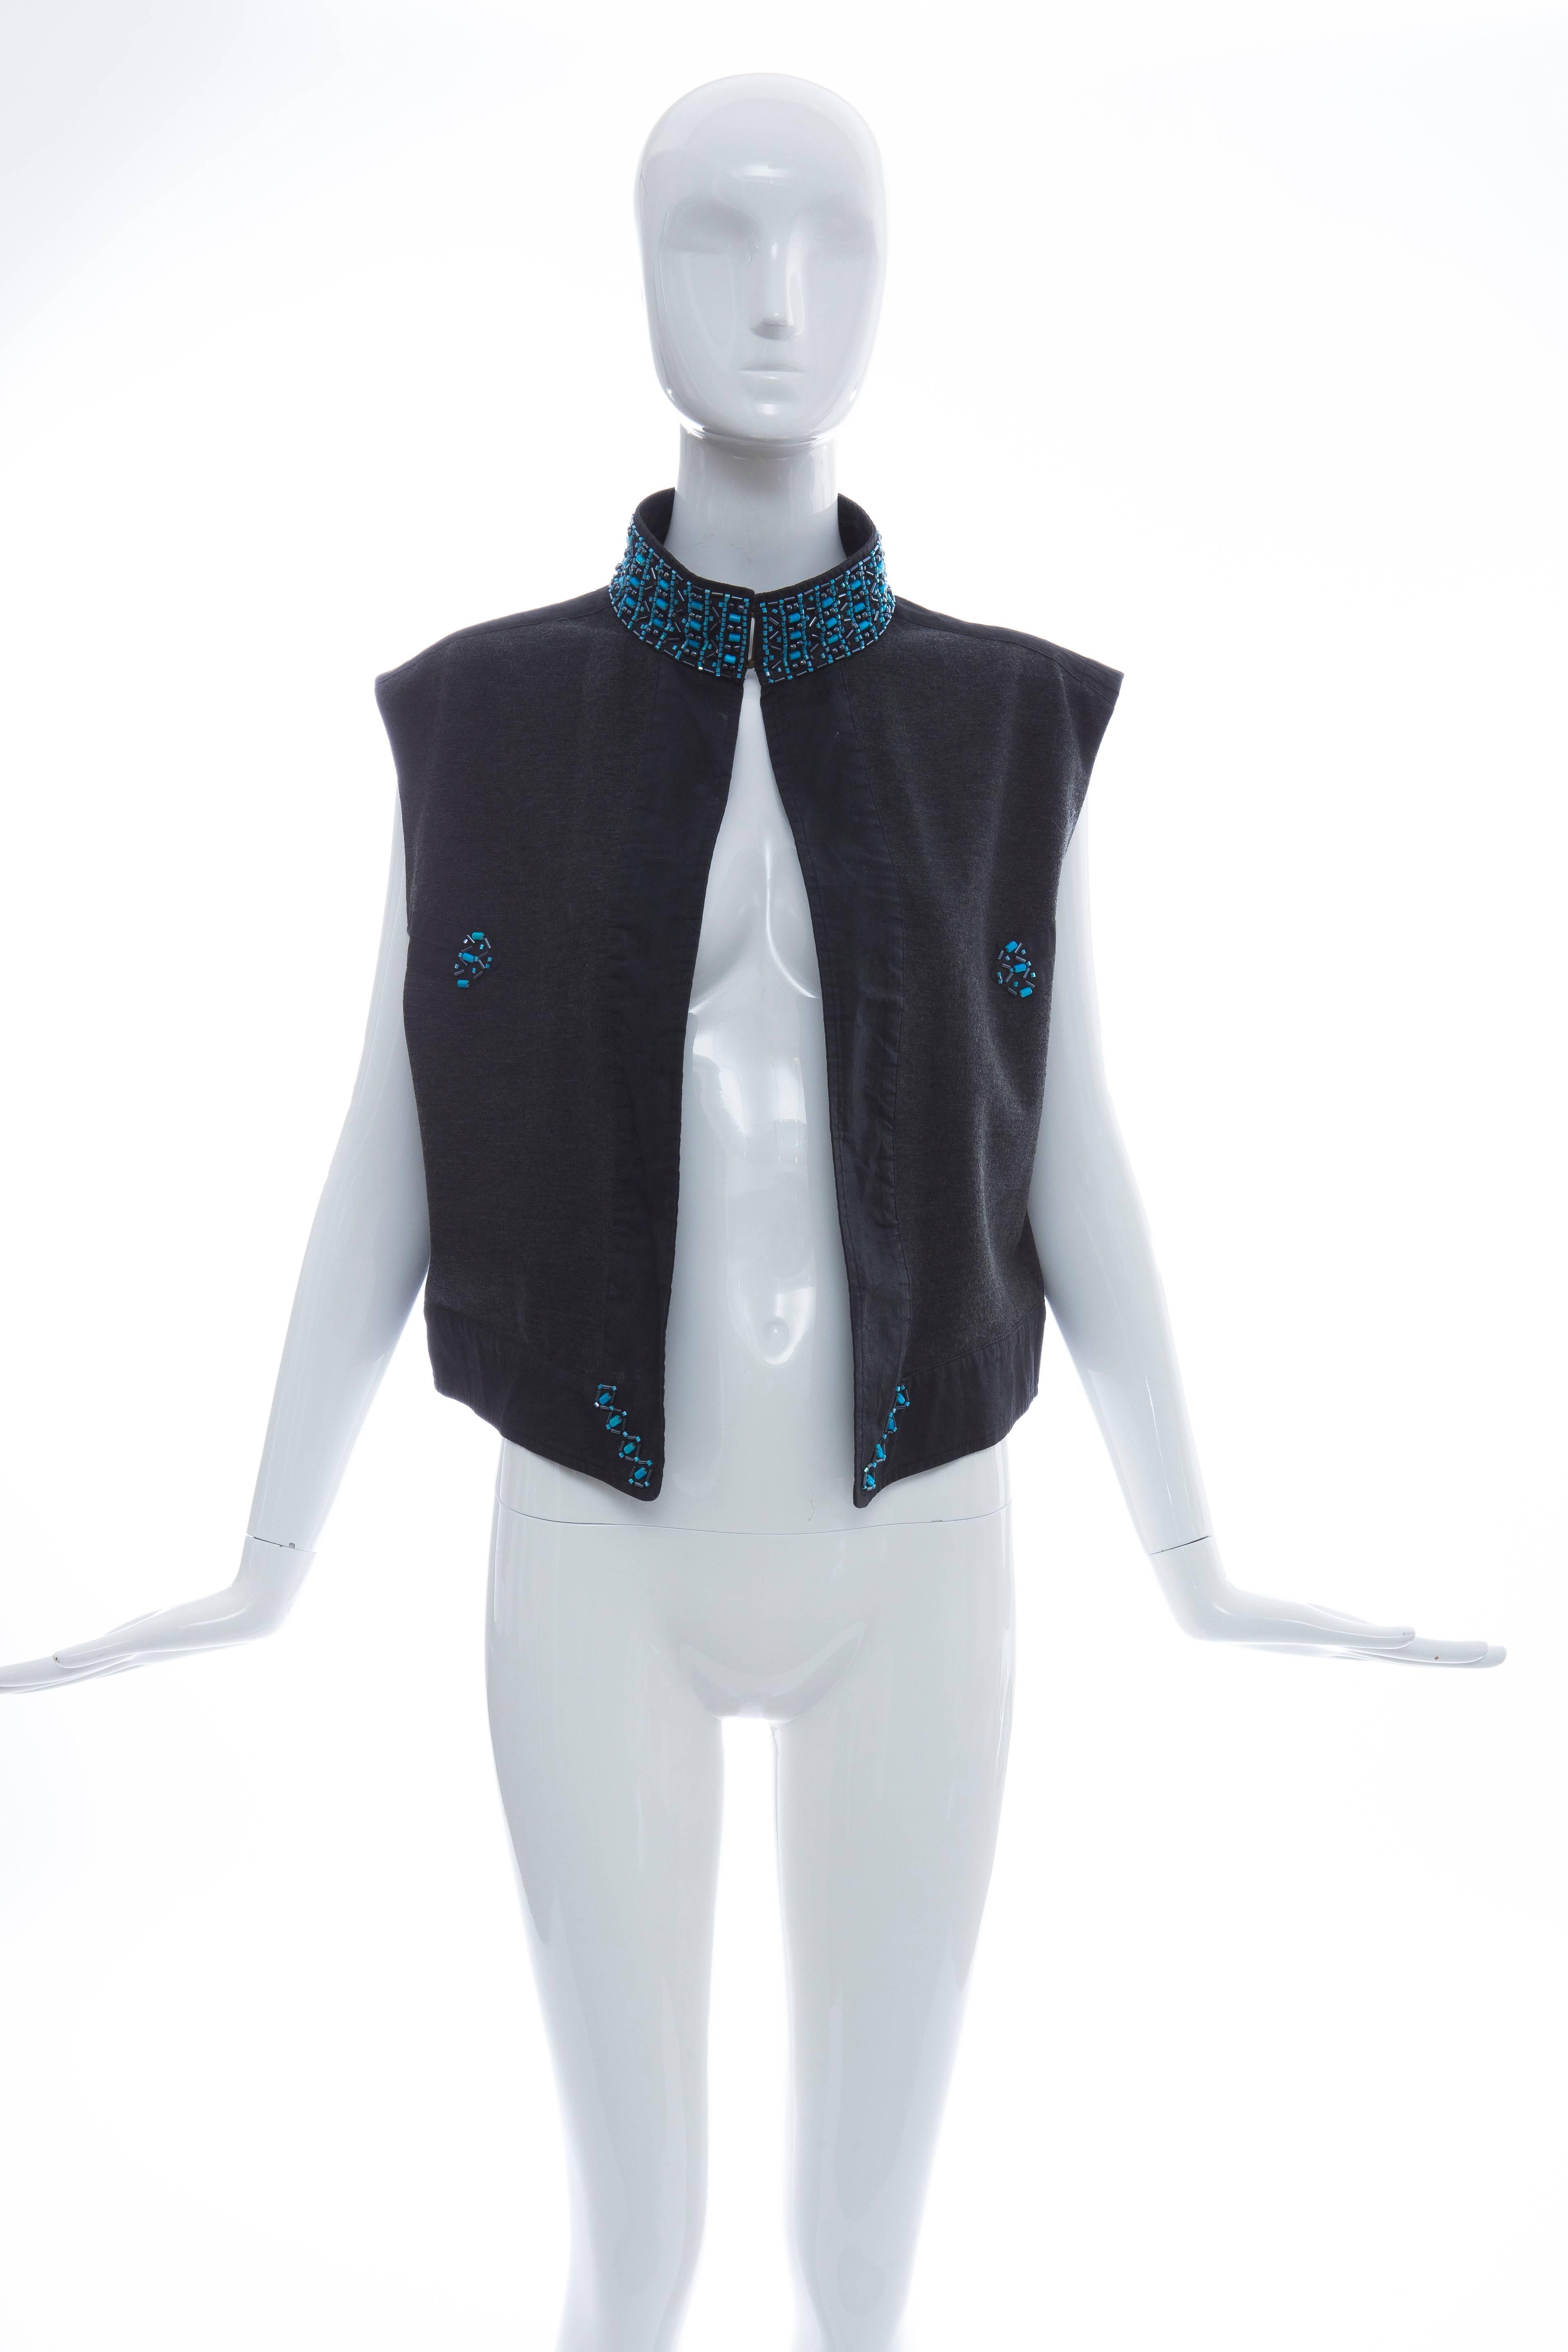 John Bartlett, Spring - Summer 2000, men's wool acrylic nylon charcoal grey vest with  black waxed cotton trim and turquoise jewel collar with hidden metal clasp.

IT. 50

Bust 42, Waist 41, Length 23